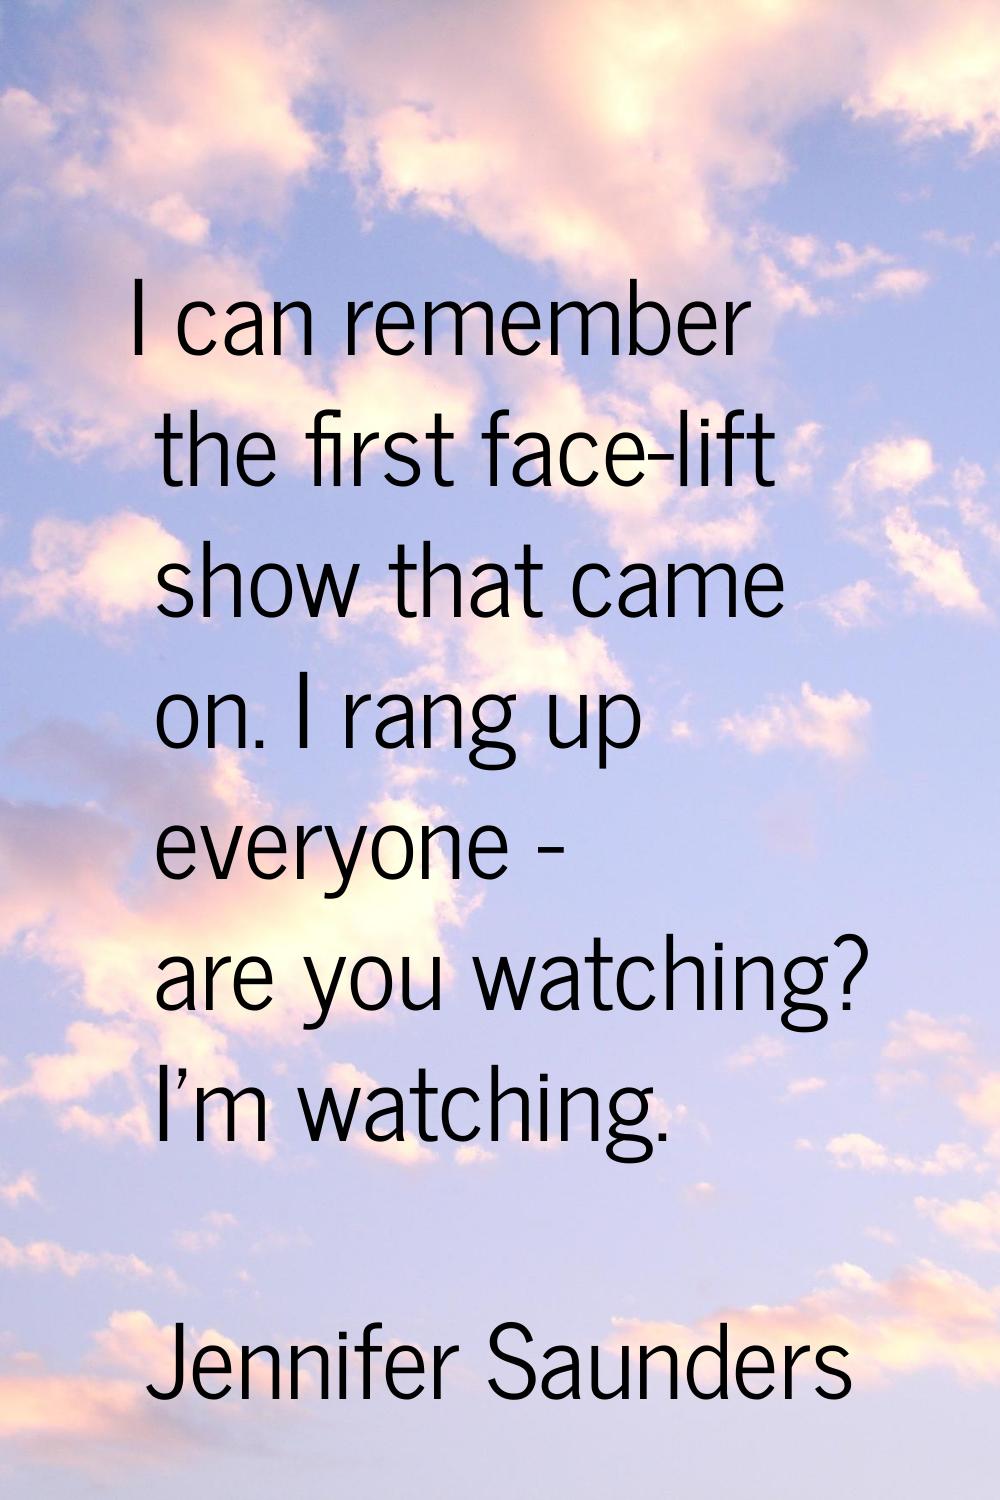 I can remember the first face-lift show that came on. I rang up everyone - are you watching? I'm wa